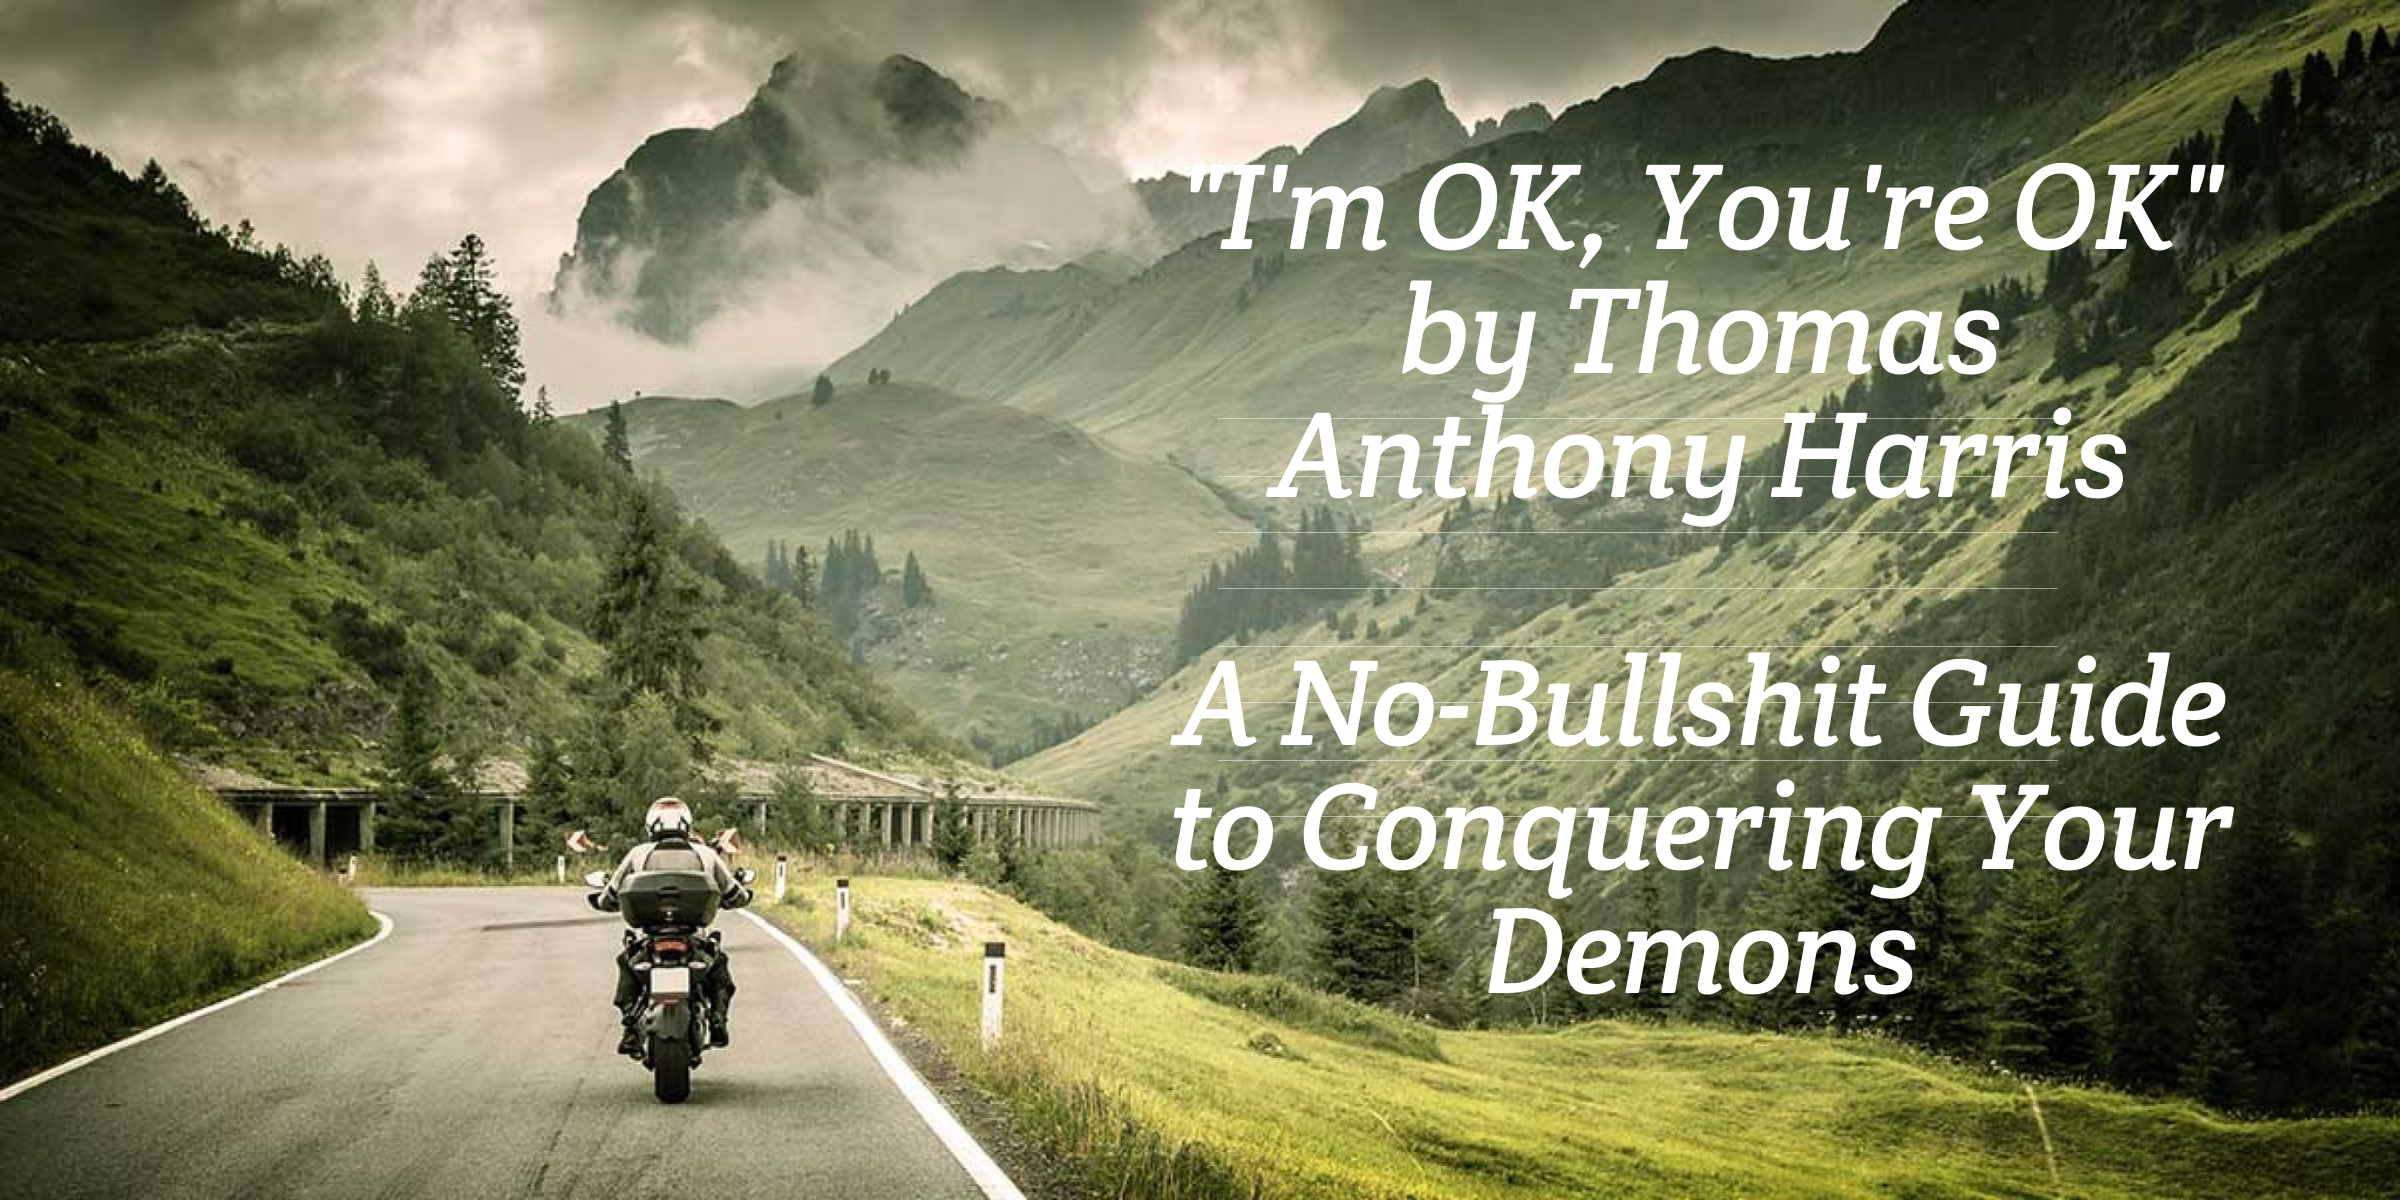 A No-Bullshit Guide to Conquering Your Demons by Anthony Harris.